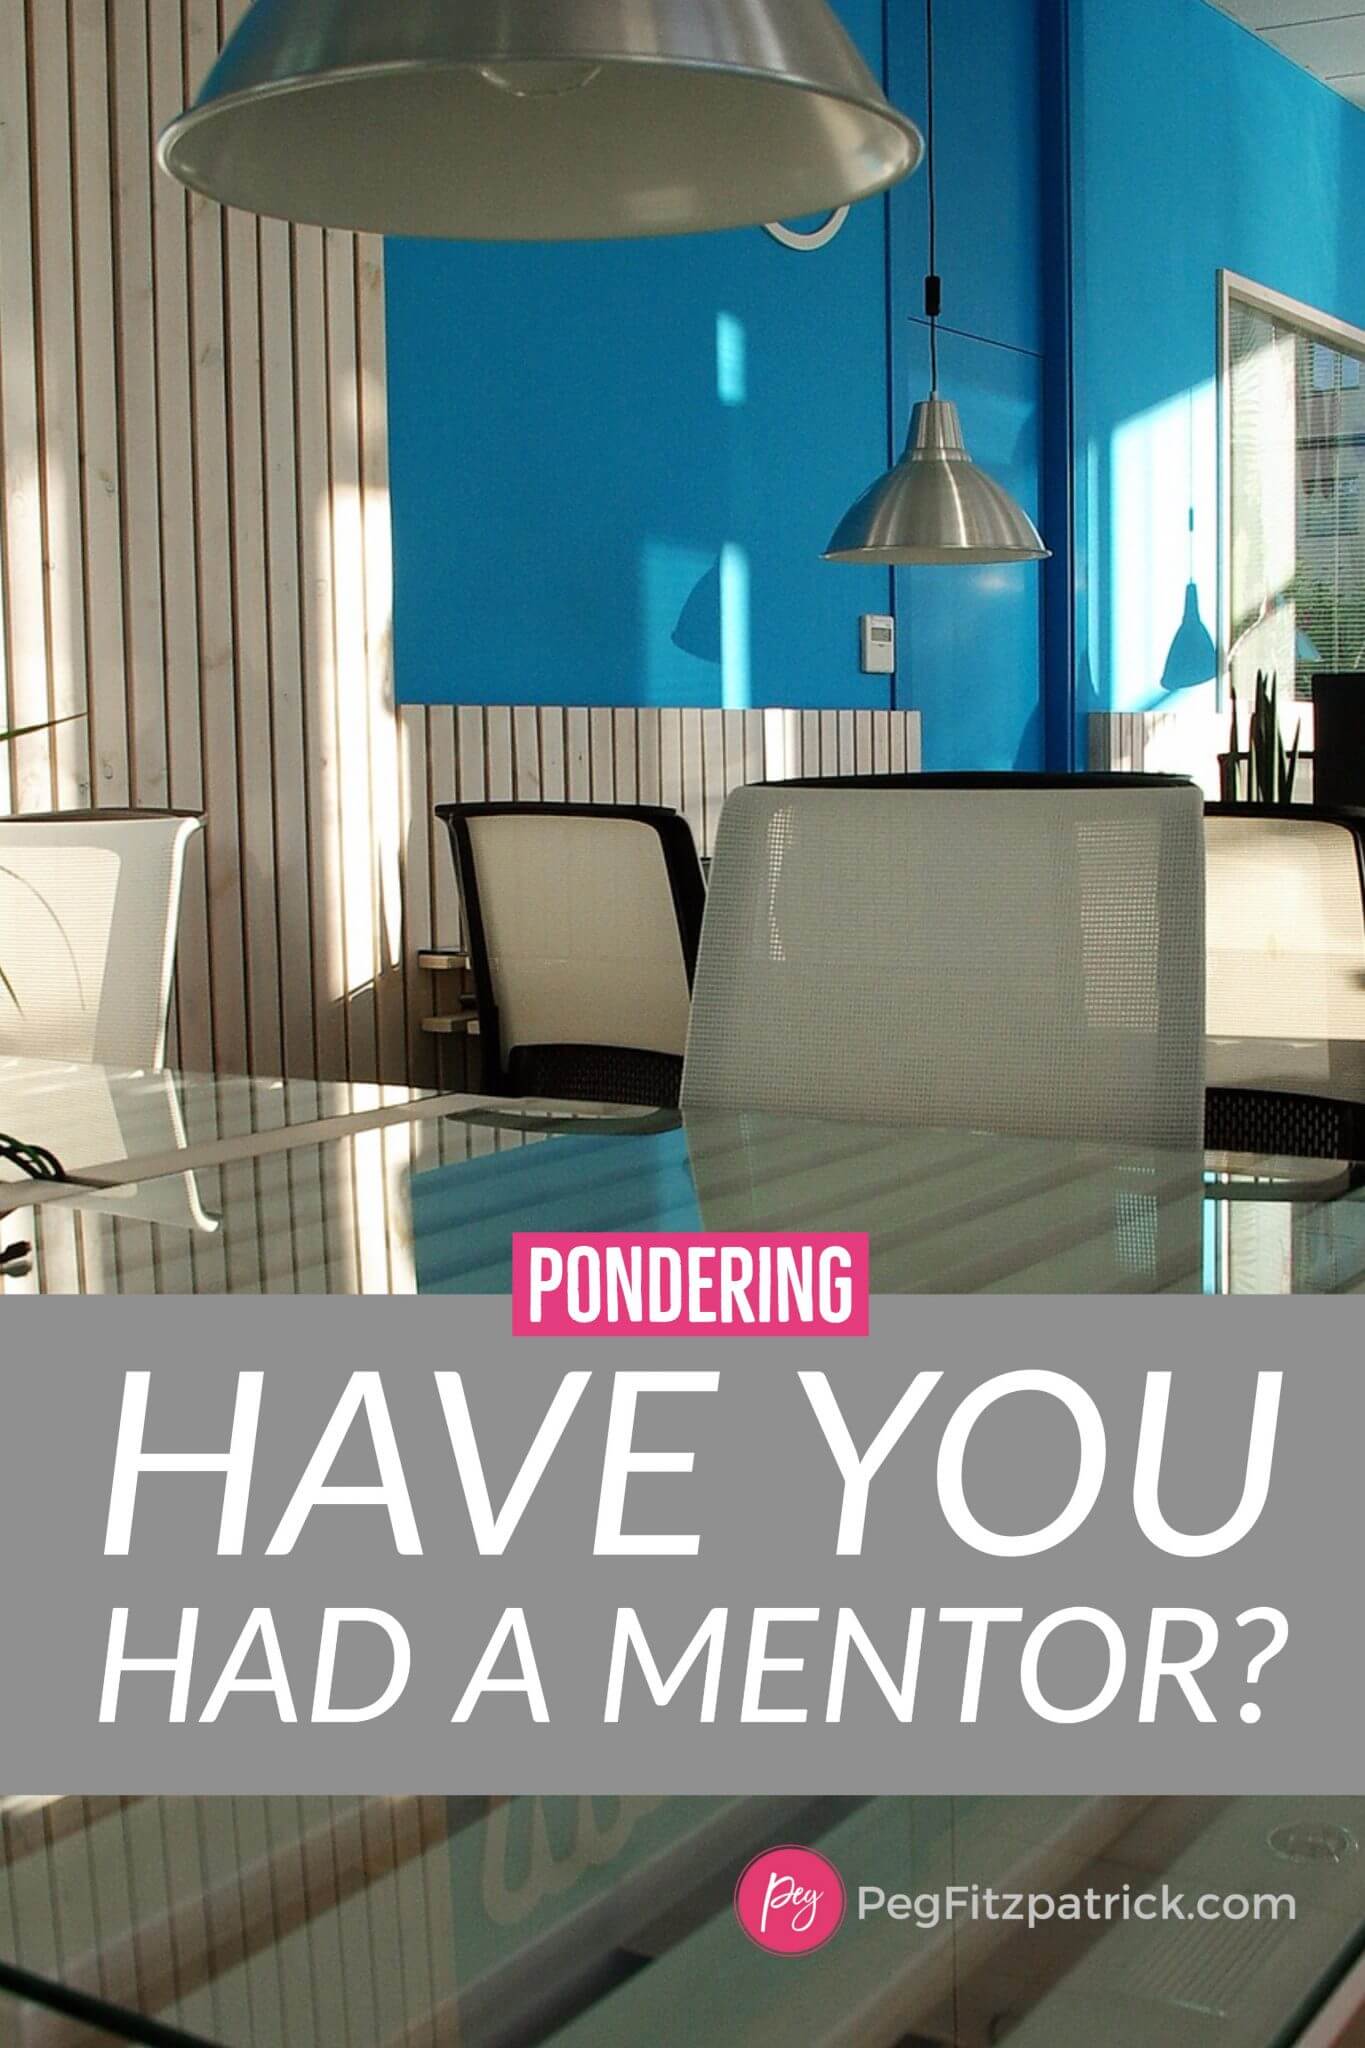 Have you had a mentor?